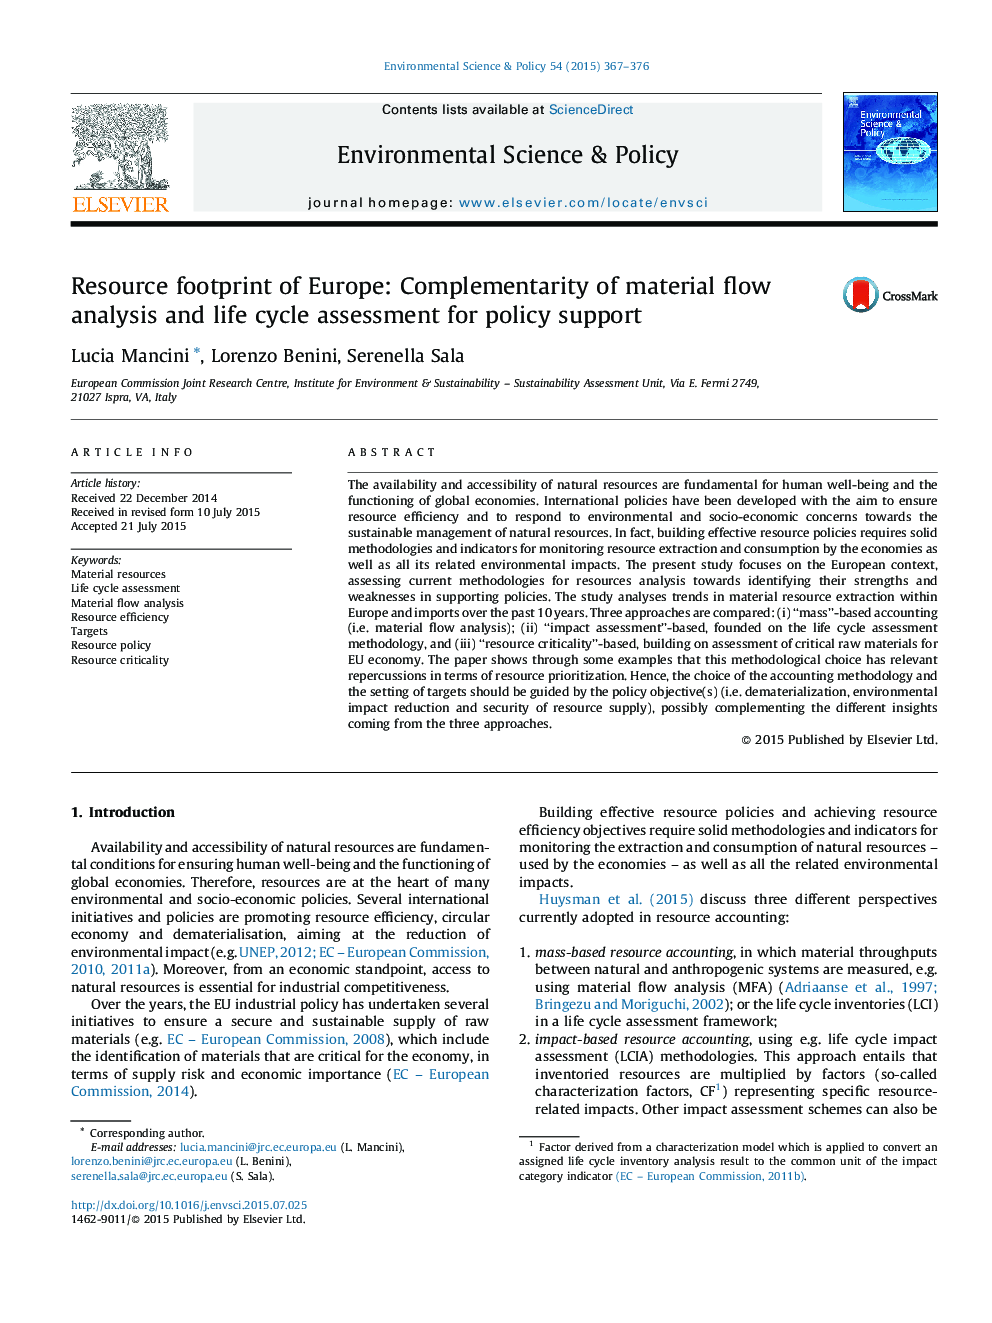 Resource footprint of Europe: Complementarity of material flow analysis and life cycle assessment for policy support